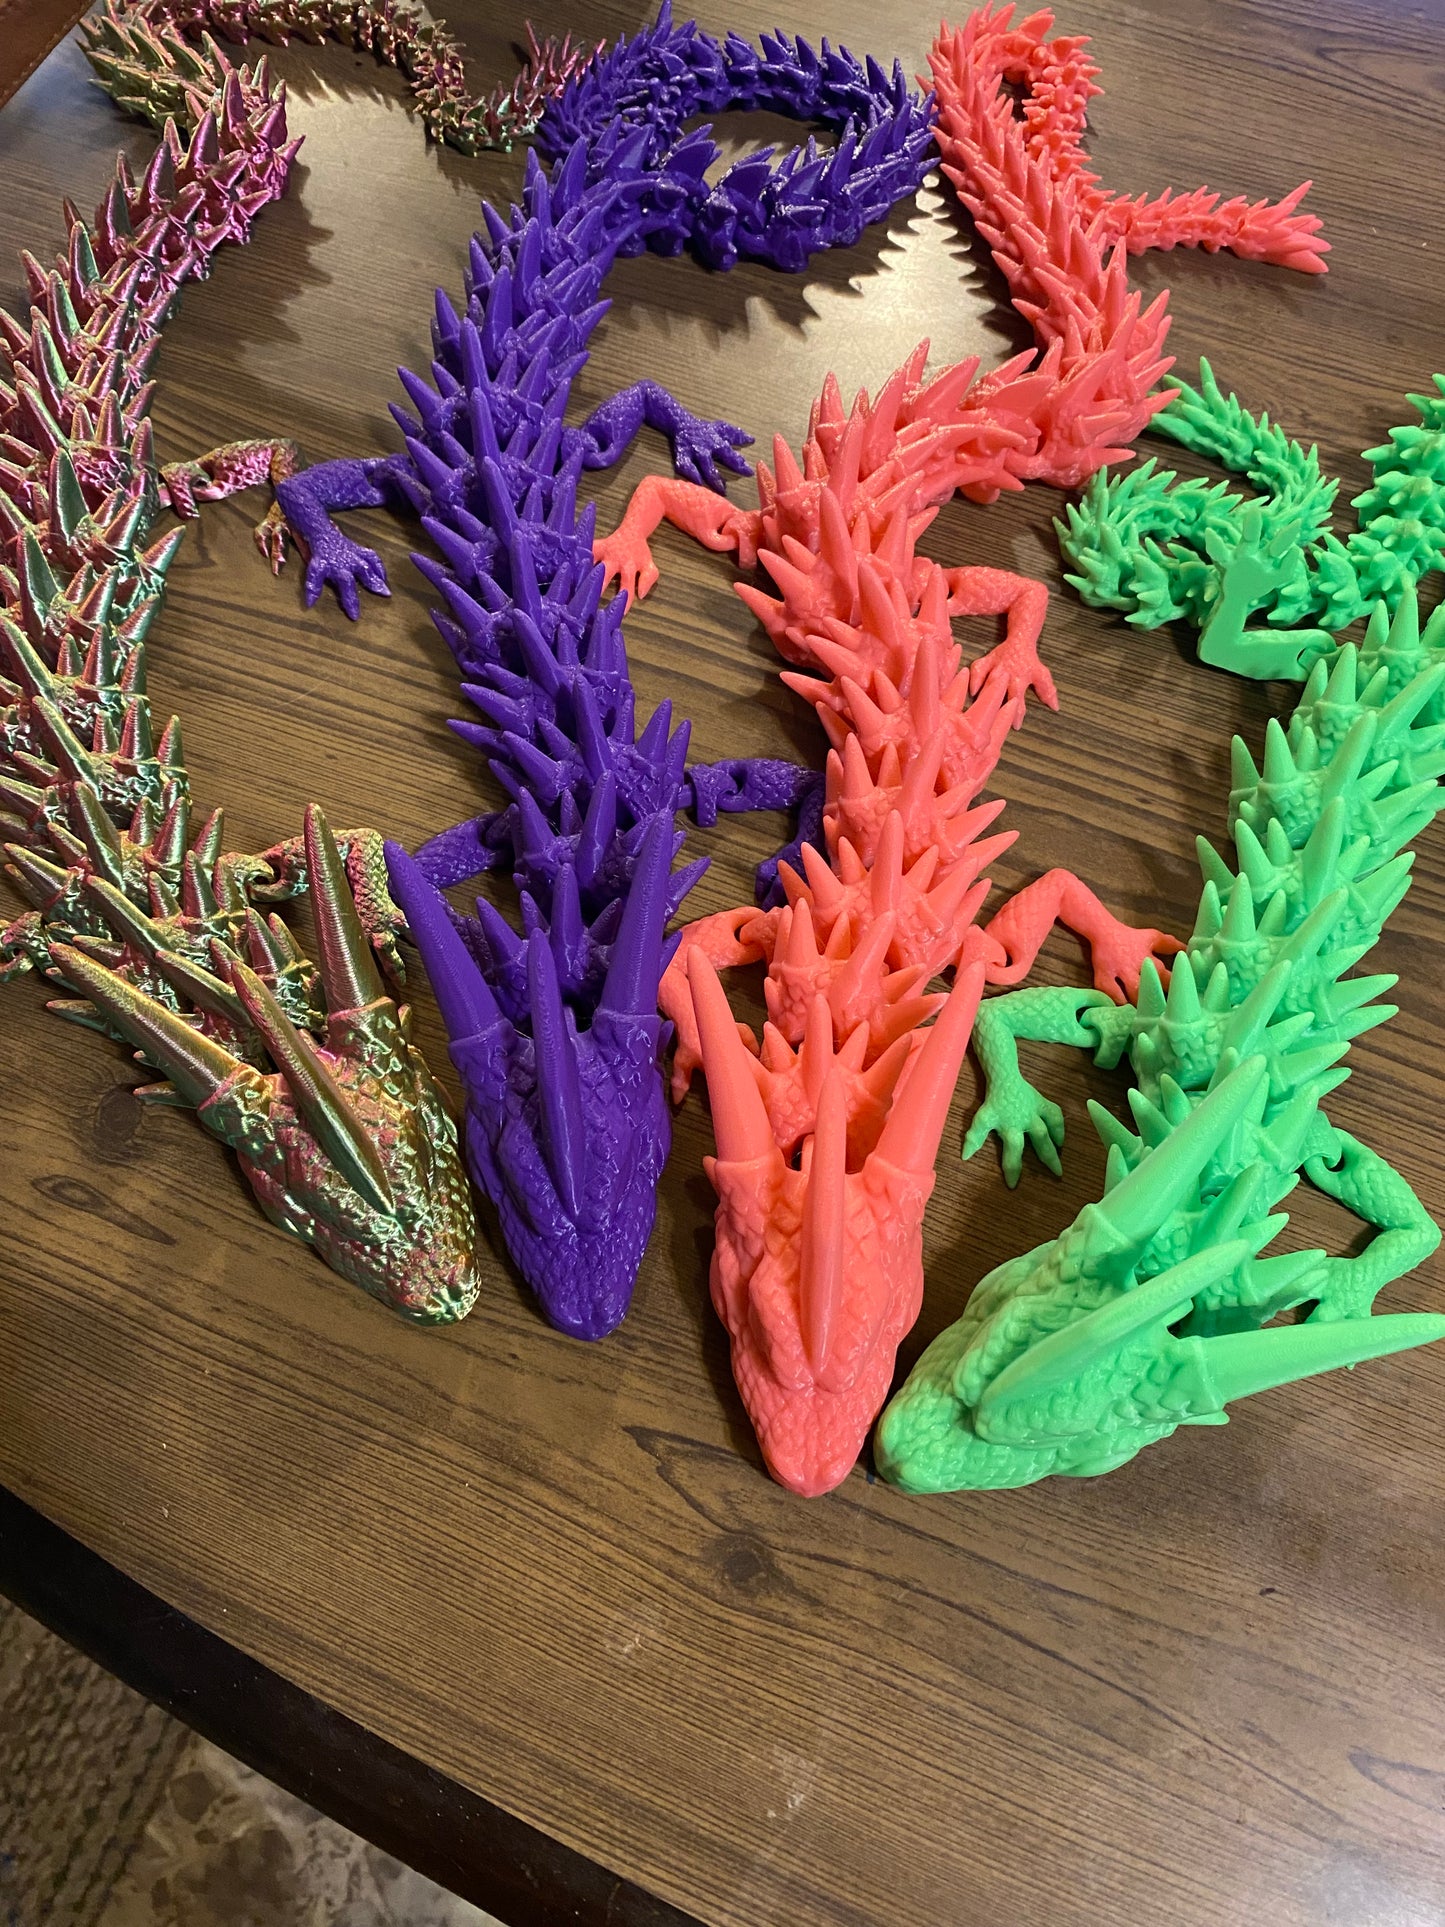 3D printed articulated dragon